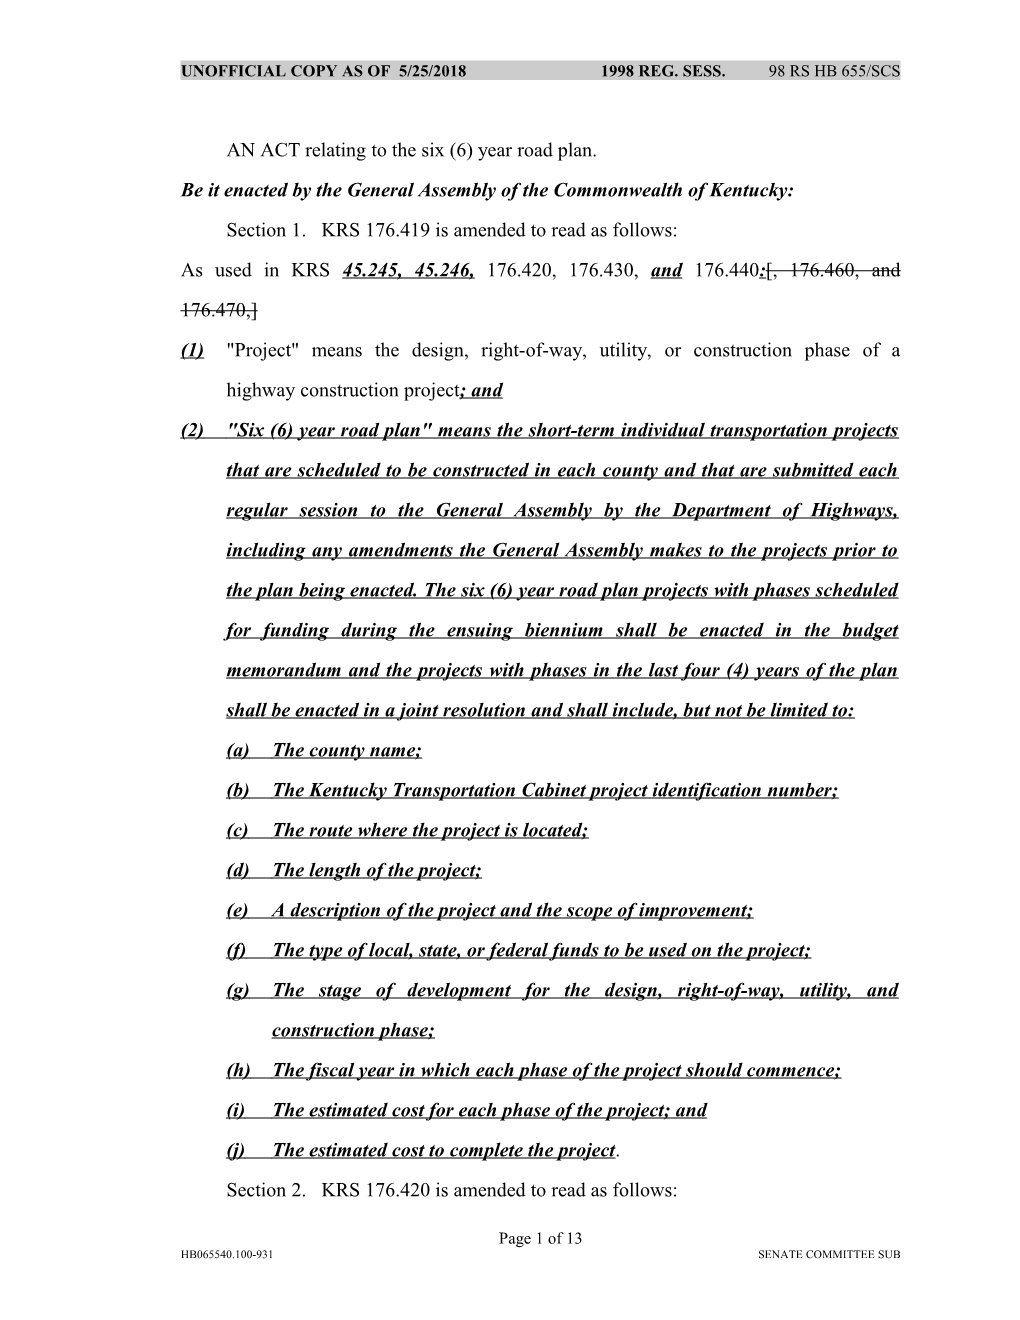 AN ACT Relating to the Six (6) Year Road Plan